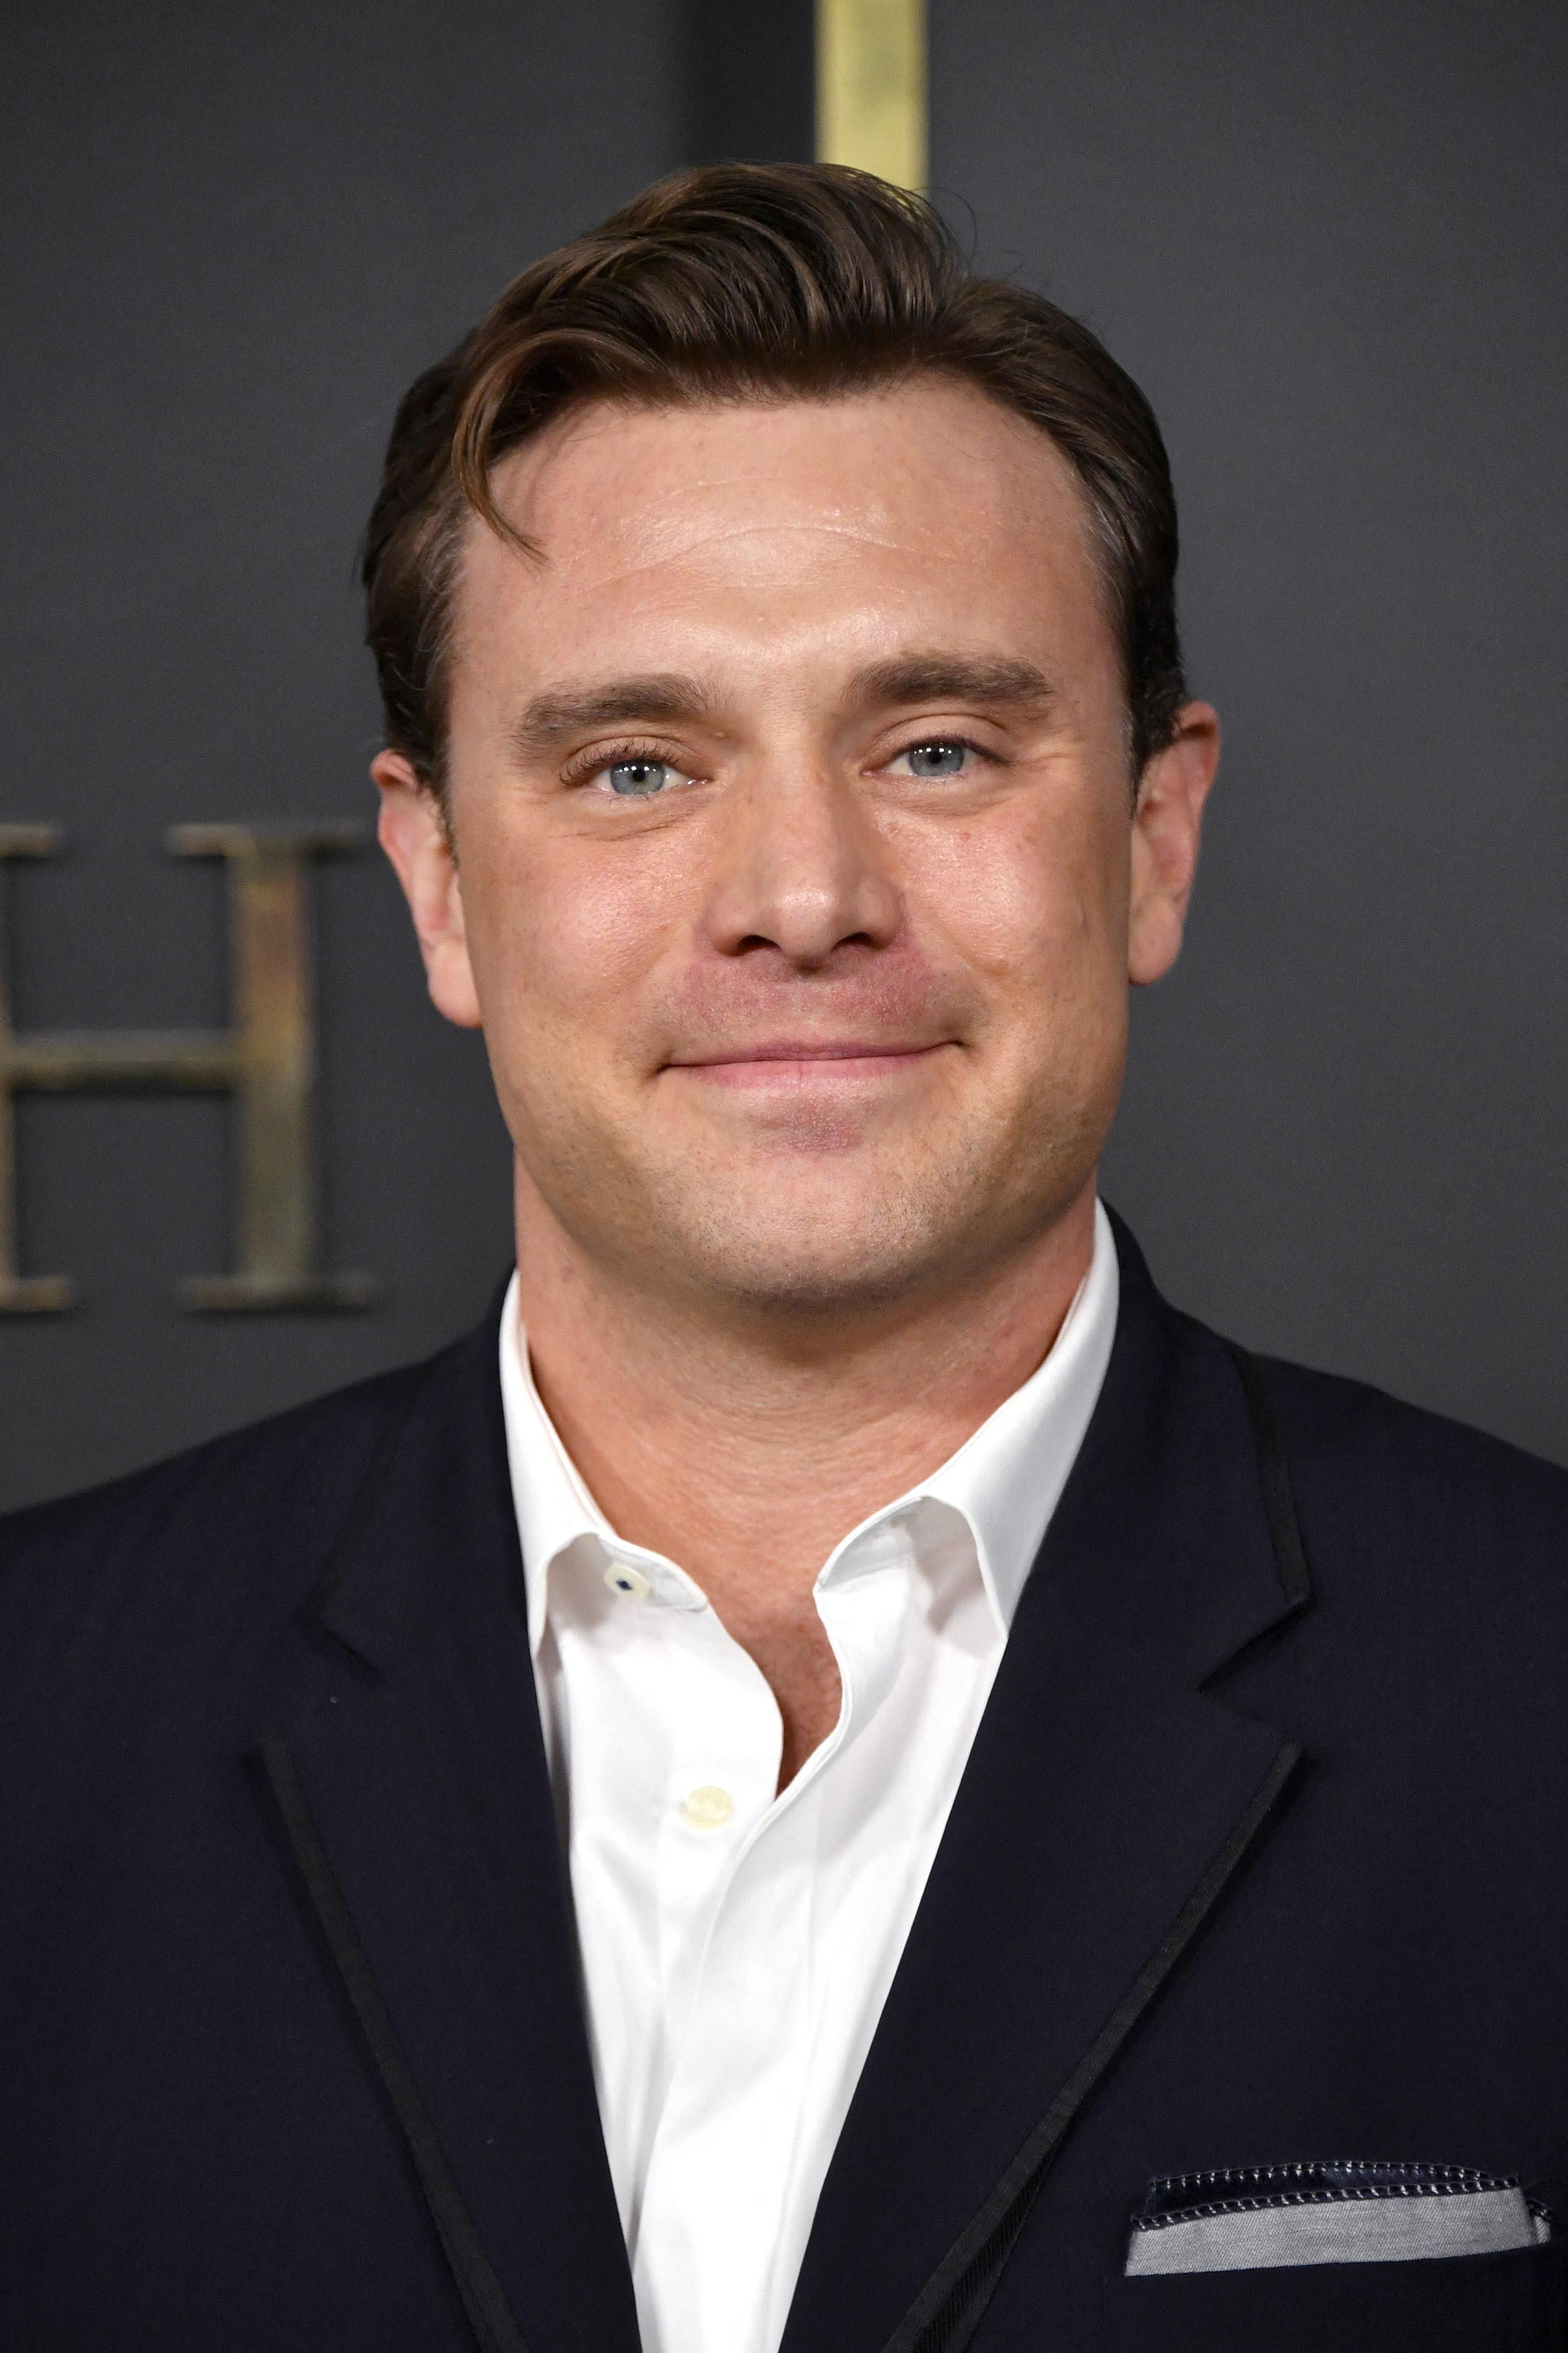 BEVERLY HILLS, CALIFORNIA - NOVEMBER 11: Billy Miller attends the Premiere of Apple TV+'s "Truth Be Told" at AMPAS Samuel Goldwyn Theater on November 11, 2019 in Beverly Hills, California.   Frazer Harrison/Getty Images/AFP (Photo by Frazer Harrison / GETTY IMAGES NORTH AMERICA / Getty Images via AFP)